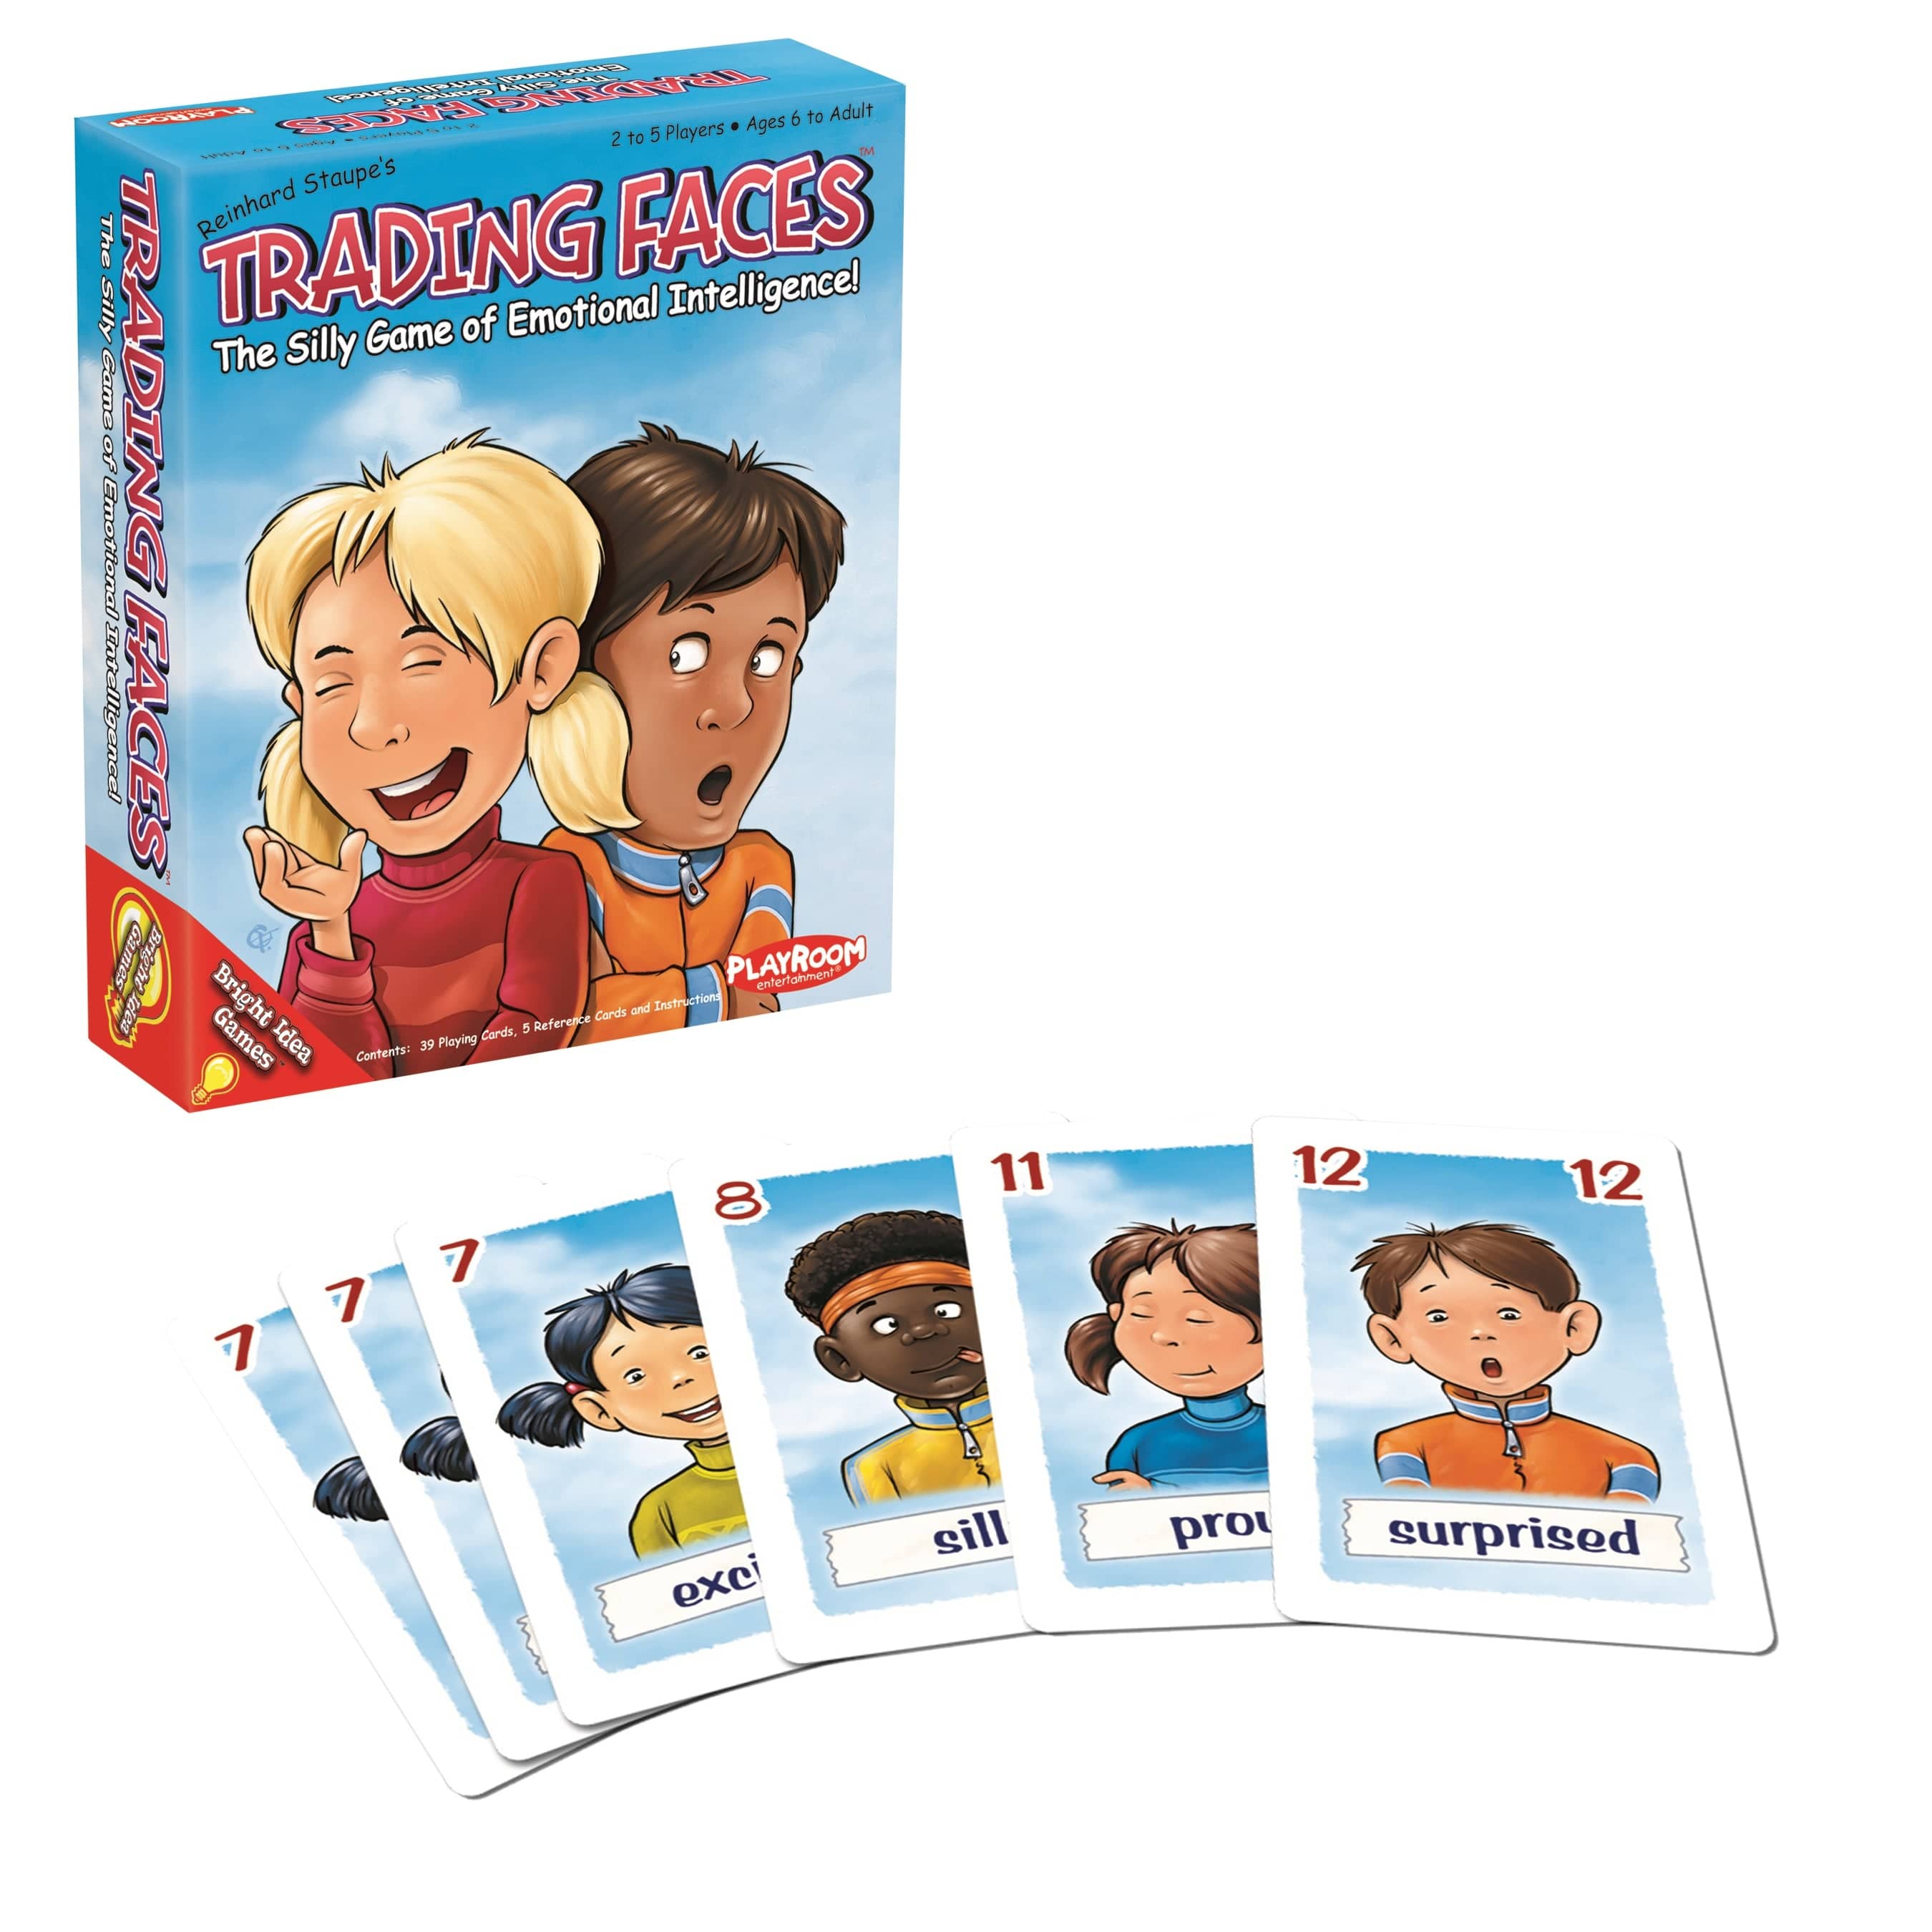 Trading Faces | An Emotion Expression Game for Ages 6 and Up | Ultra PRO Entertainment